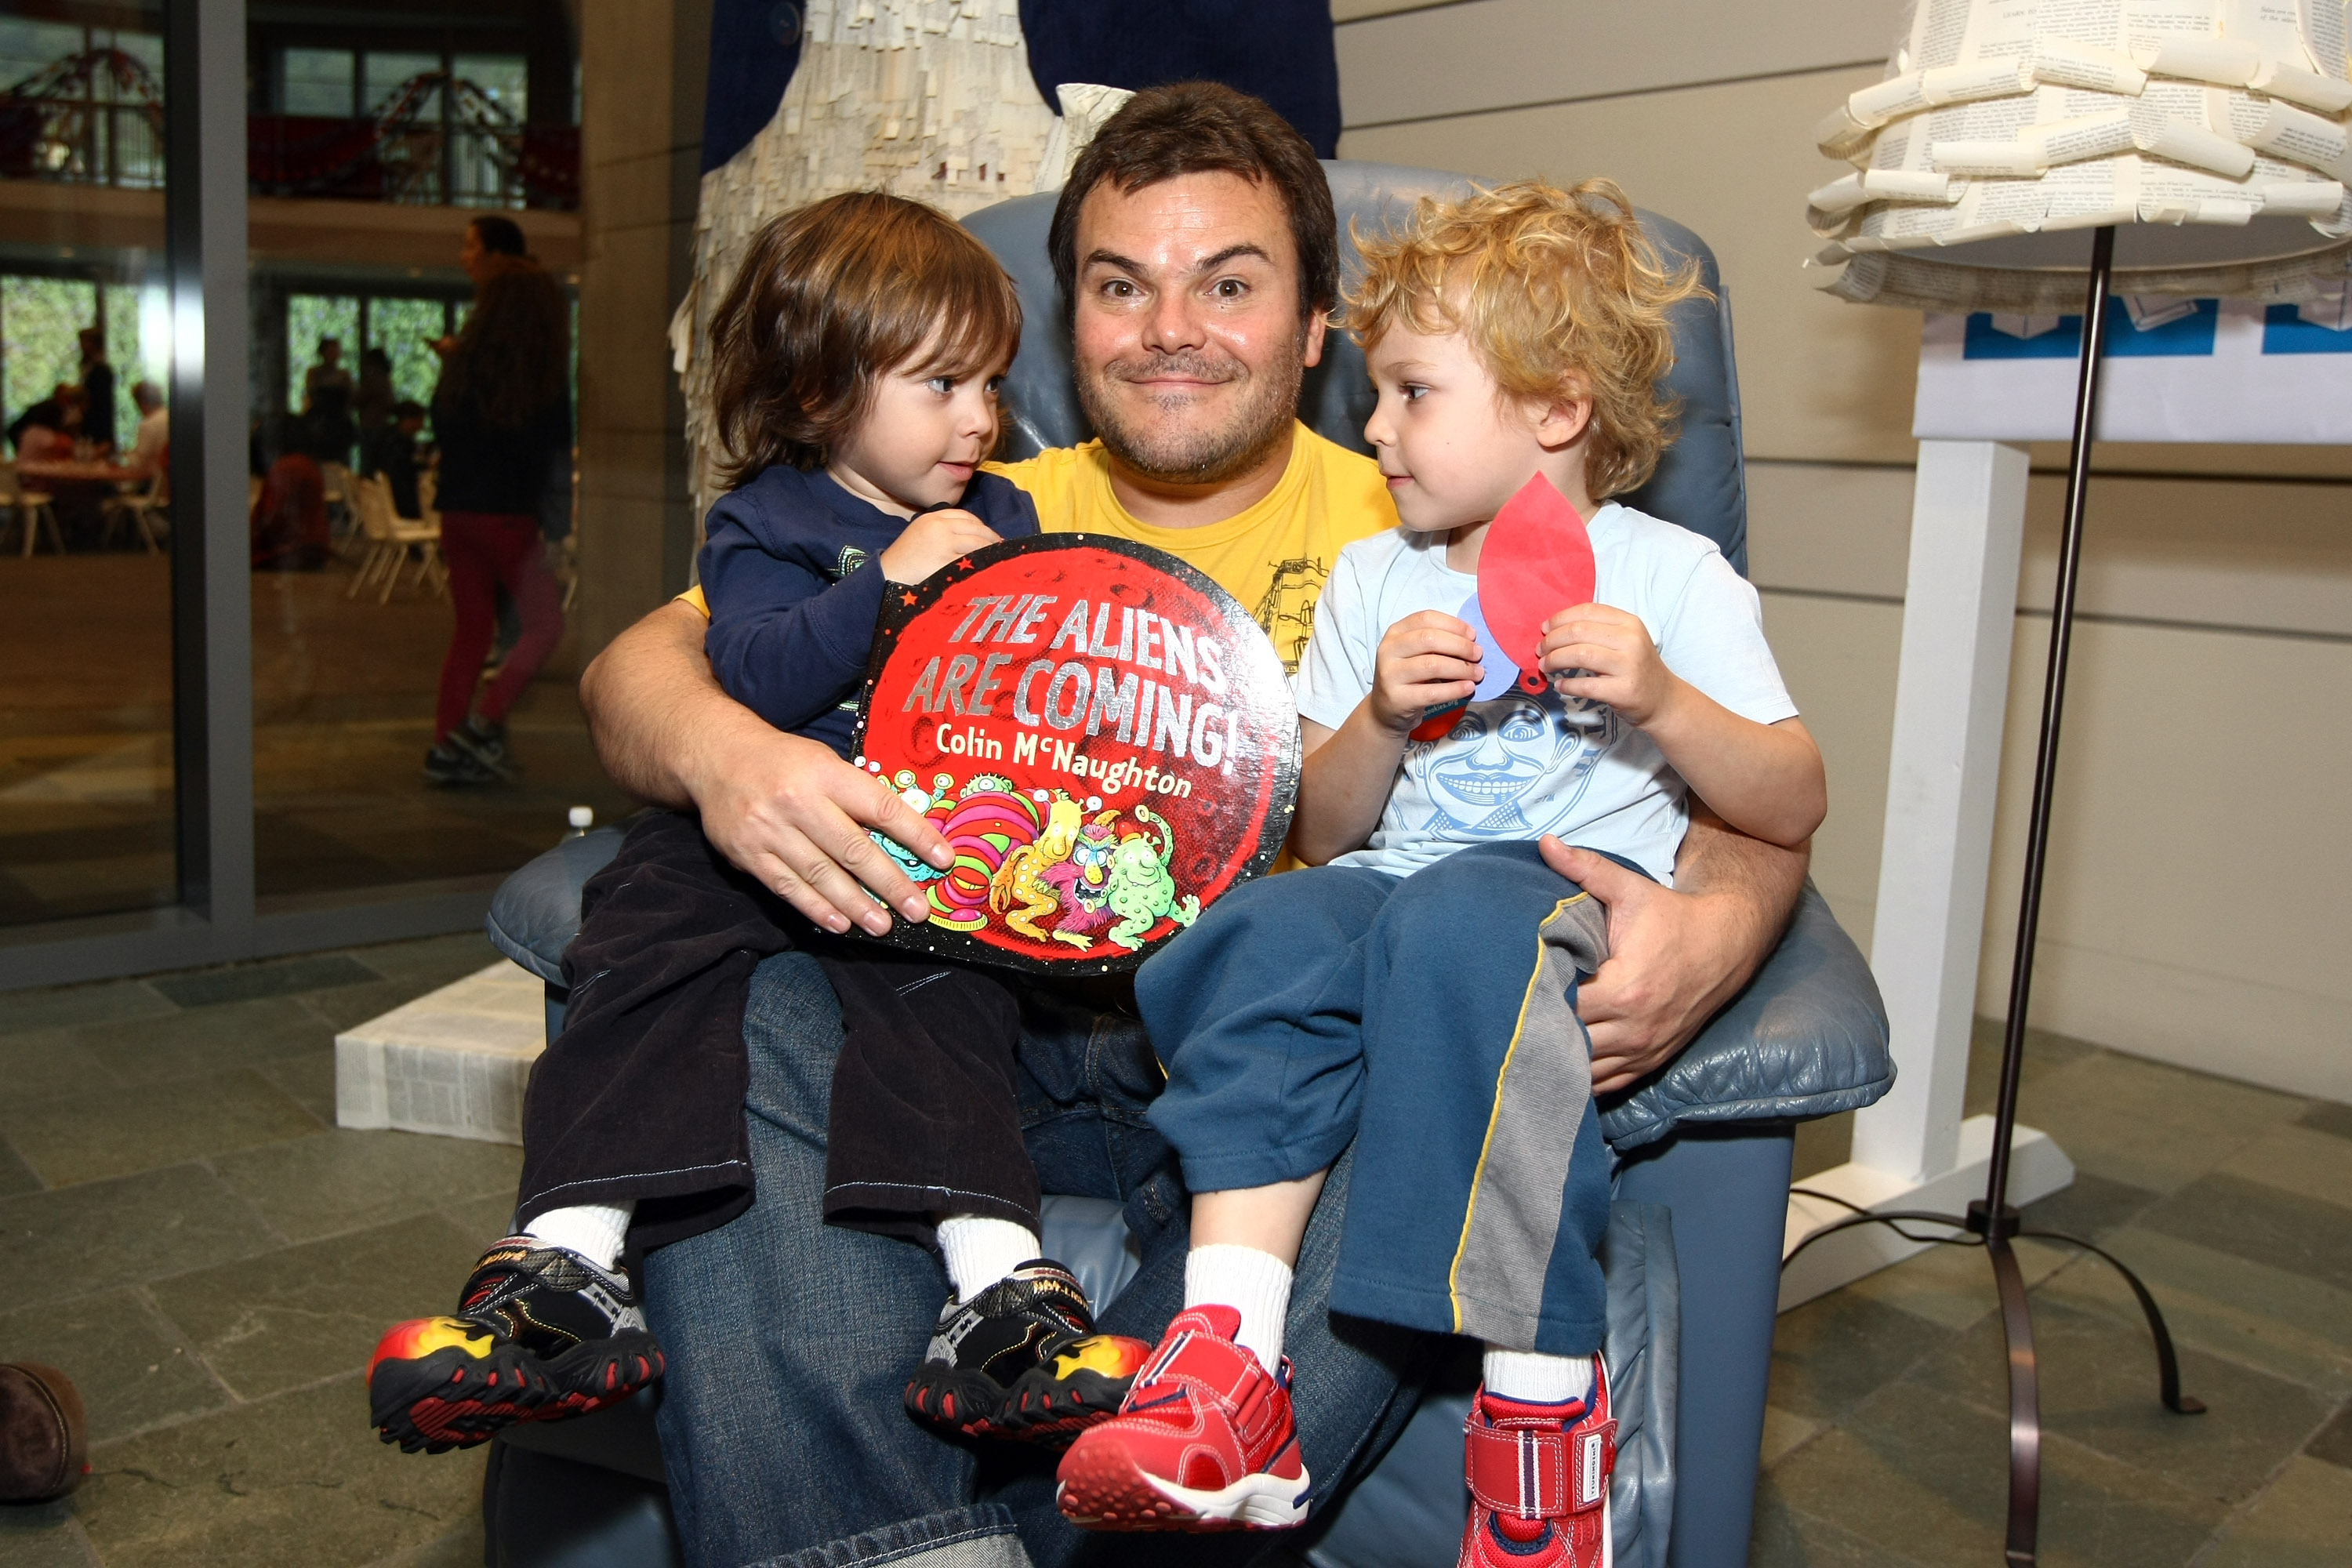 Jack Black (C) with sons Thomas and Samuel at the Milk + Bookies Second Annual Reading Room sponsored by the Children's Book of the Month Club at the Skirball Cultural Center in Los Angeles, California on March 20, 2011 | Source: Getty Images